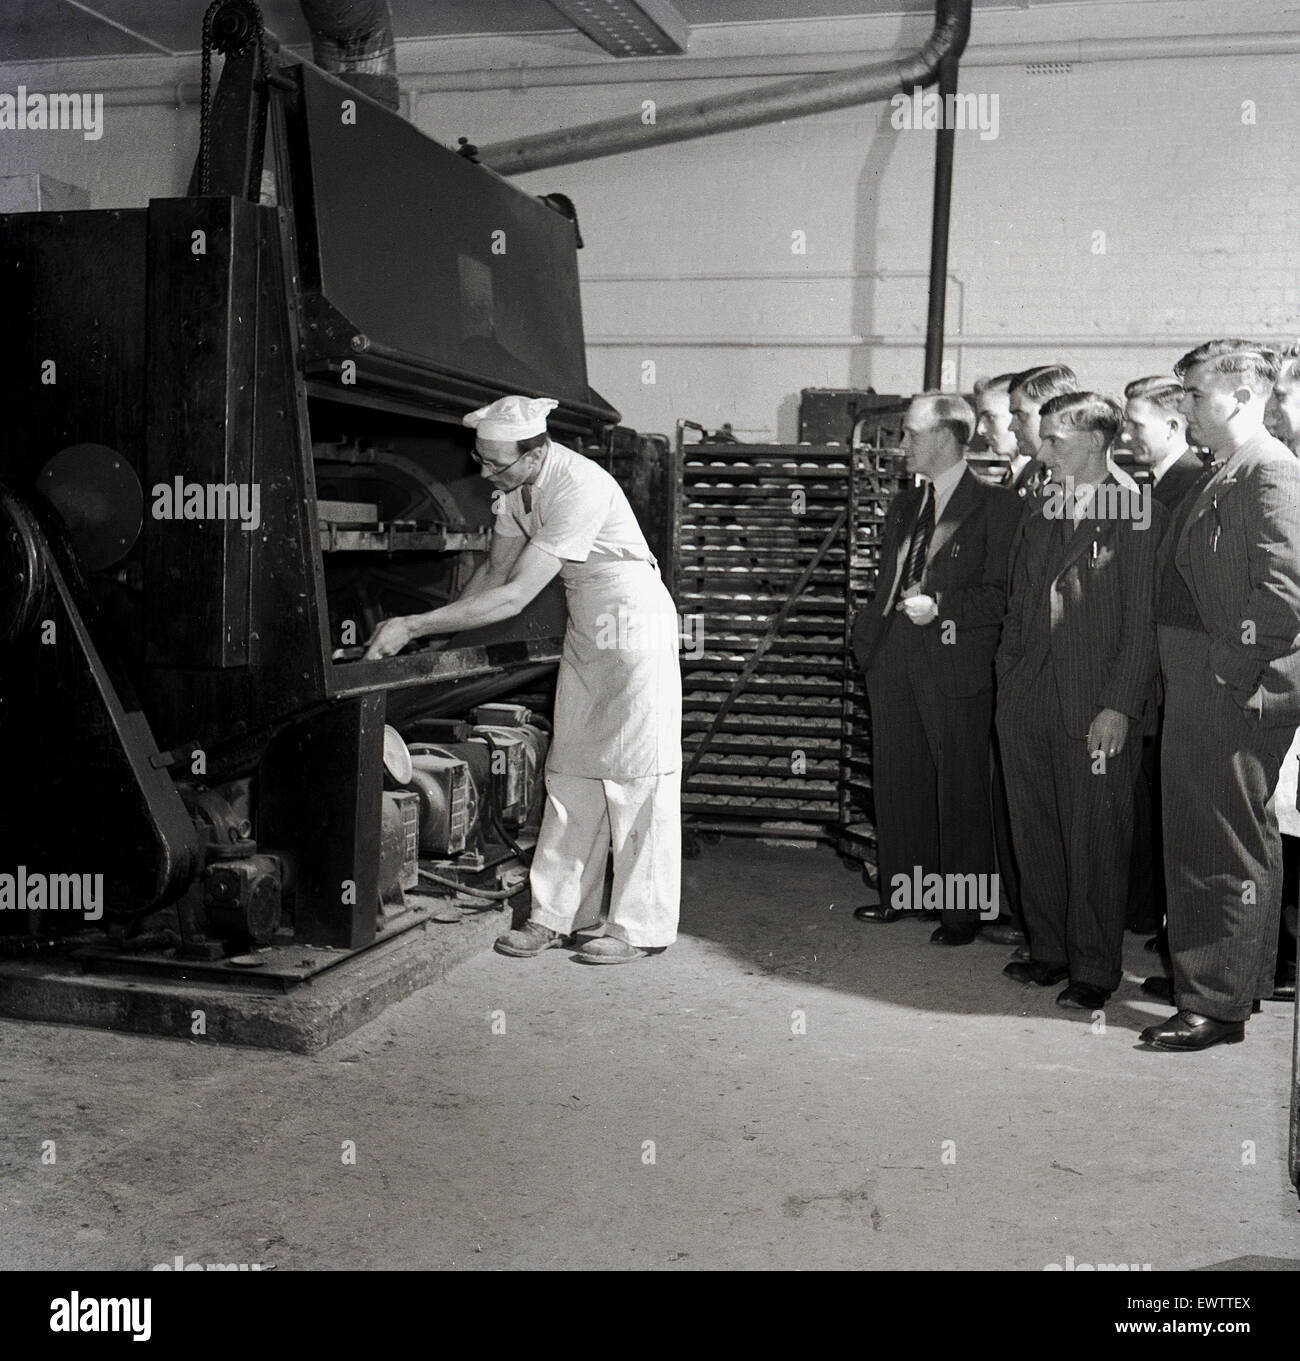 historical, 1950s, male chef showing group of adult men a large industrial sized bread oven. Stock Photo